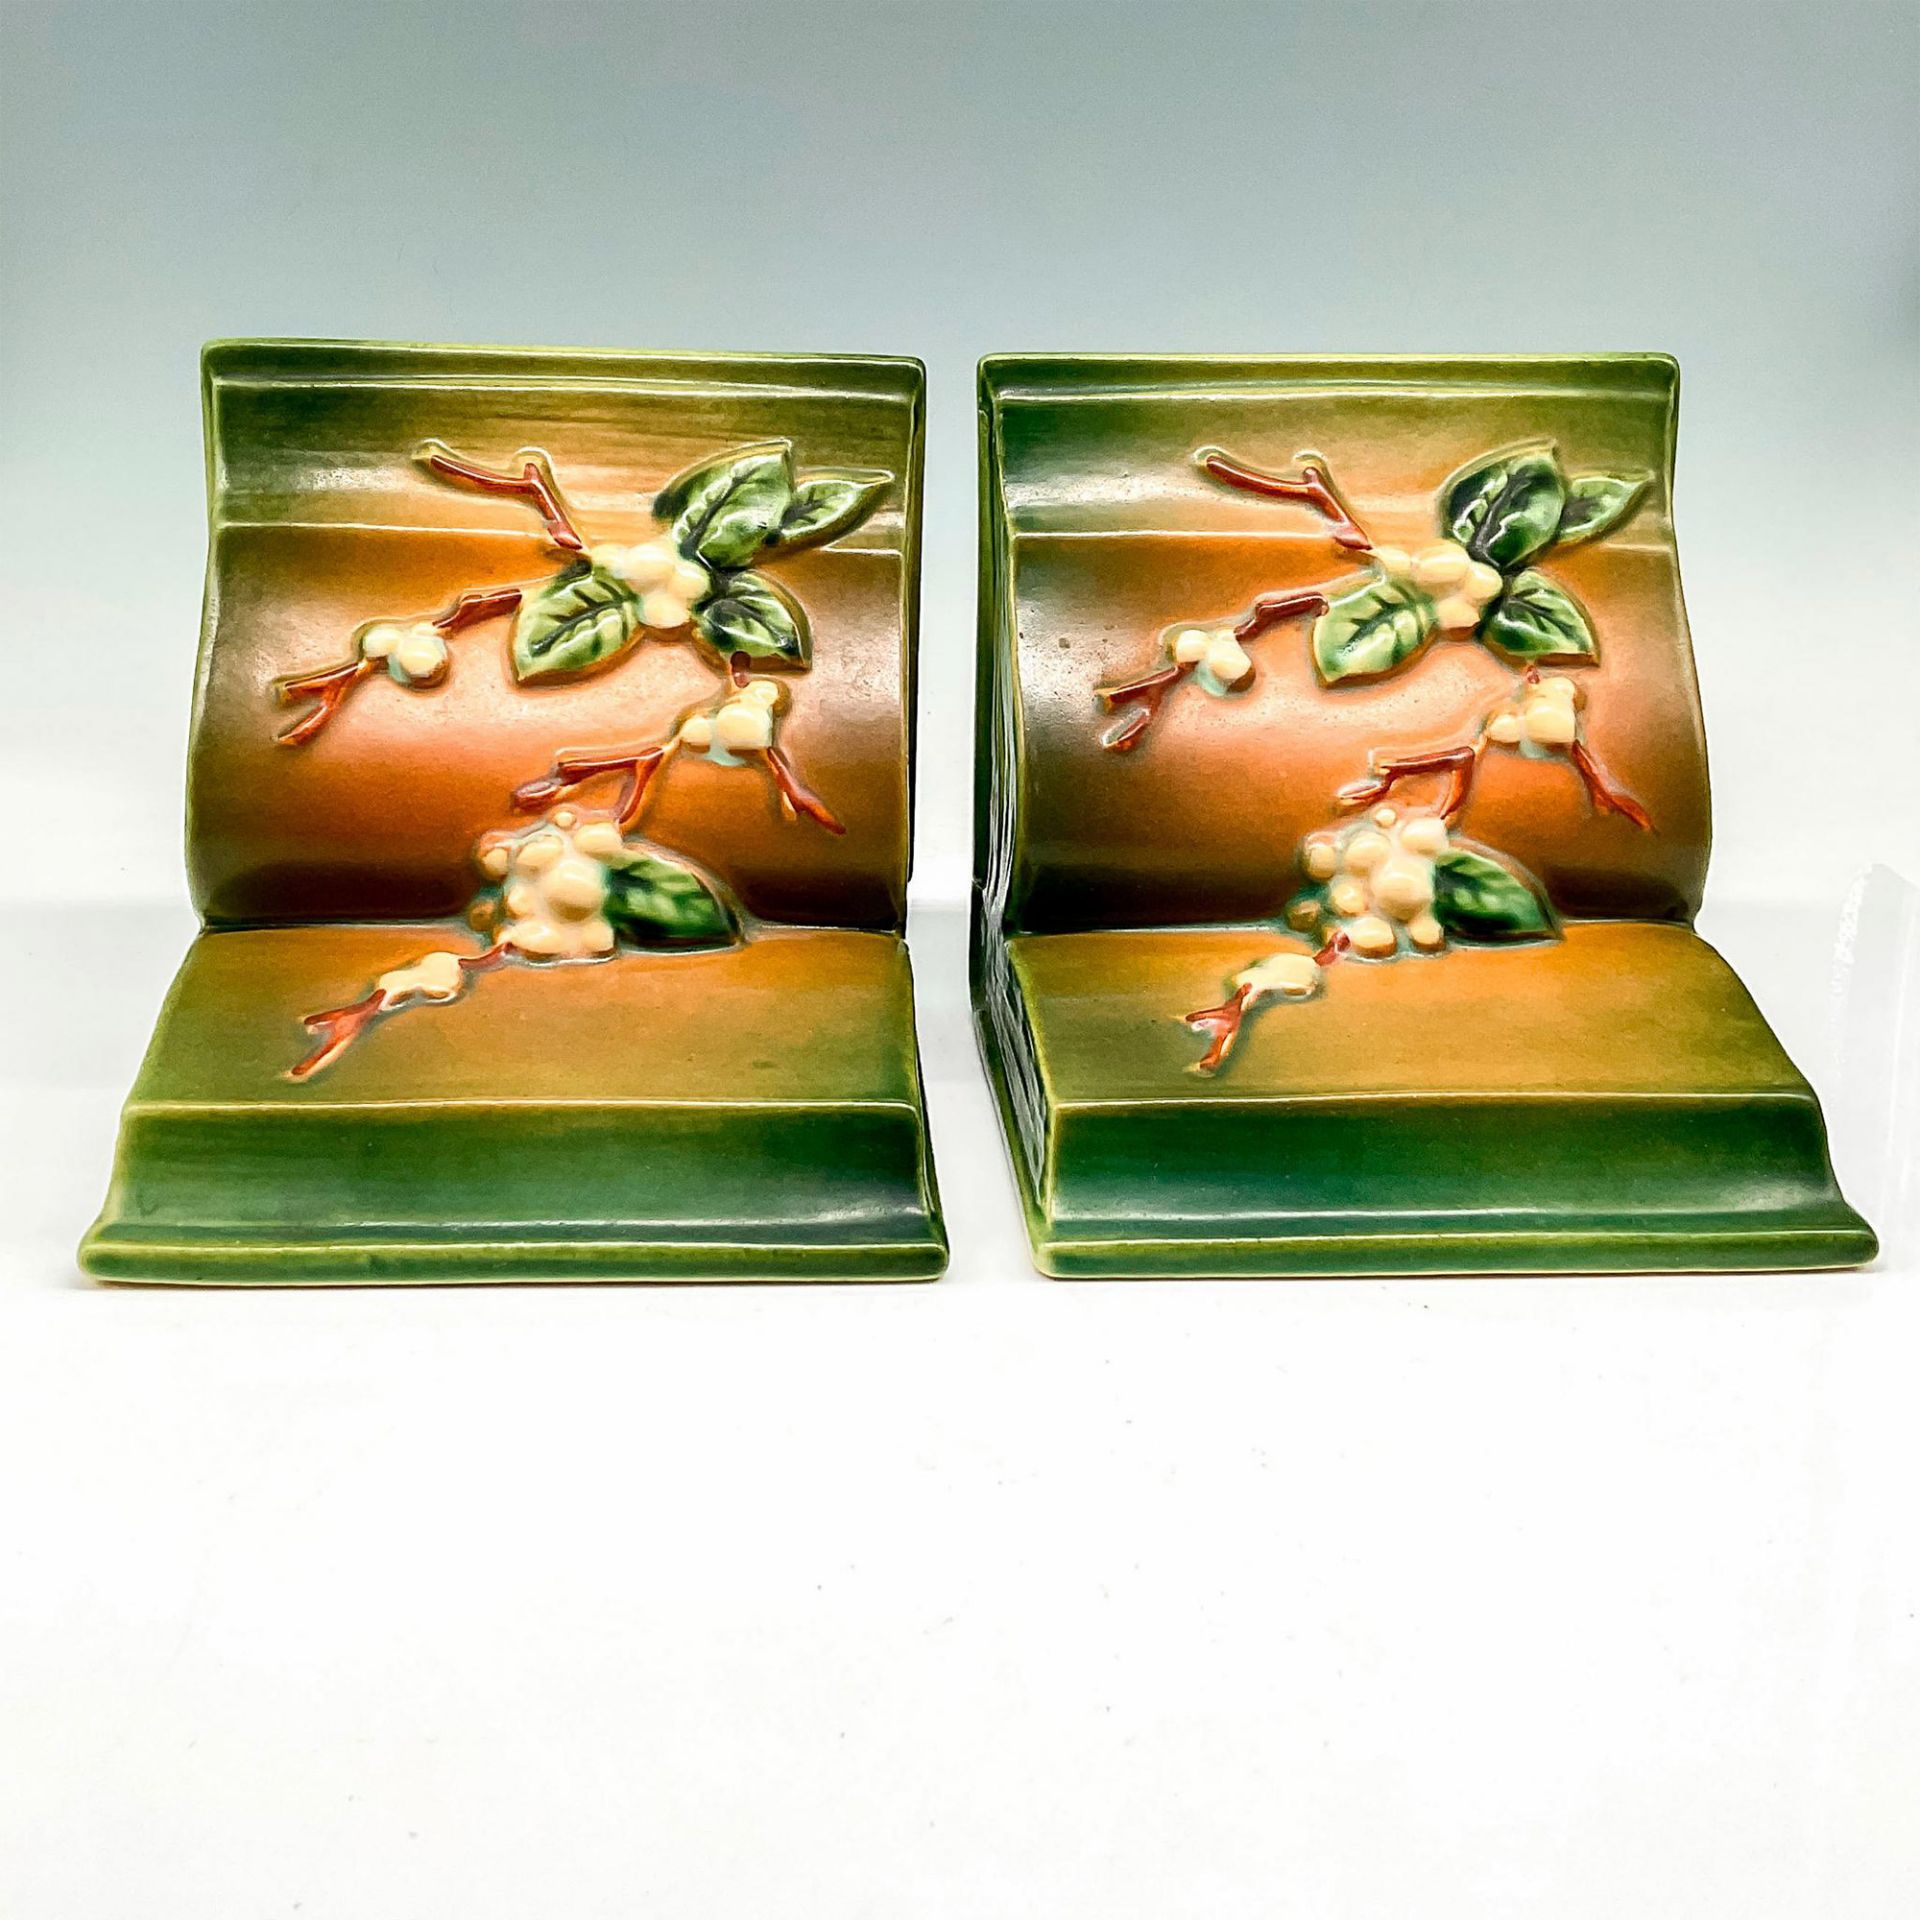 Roseville Pottery Pair of Bookends, Snowberry Green - Image 2 of 3